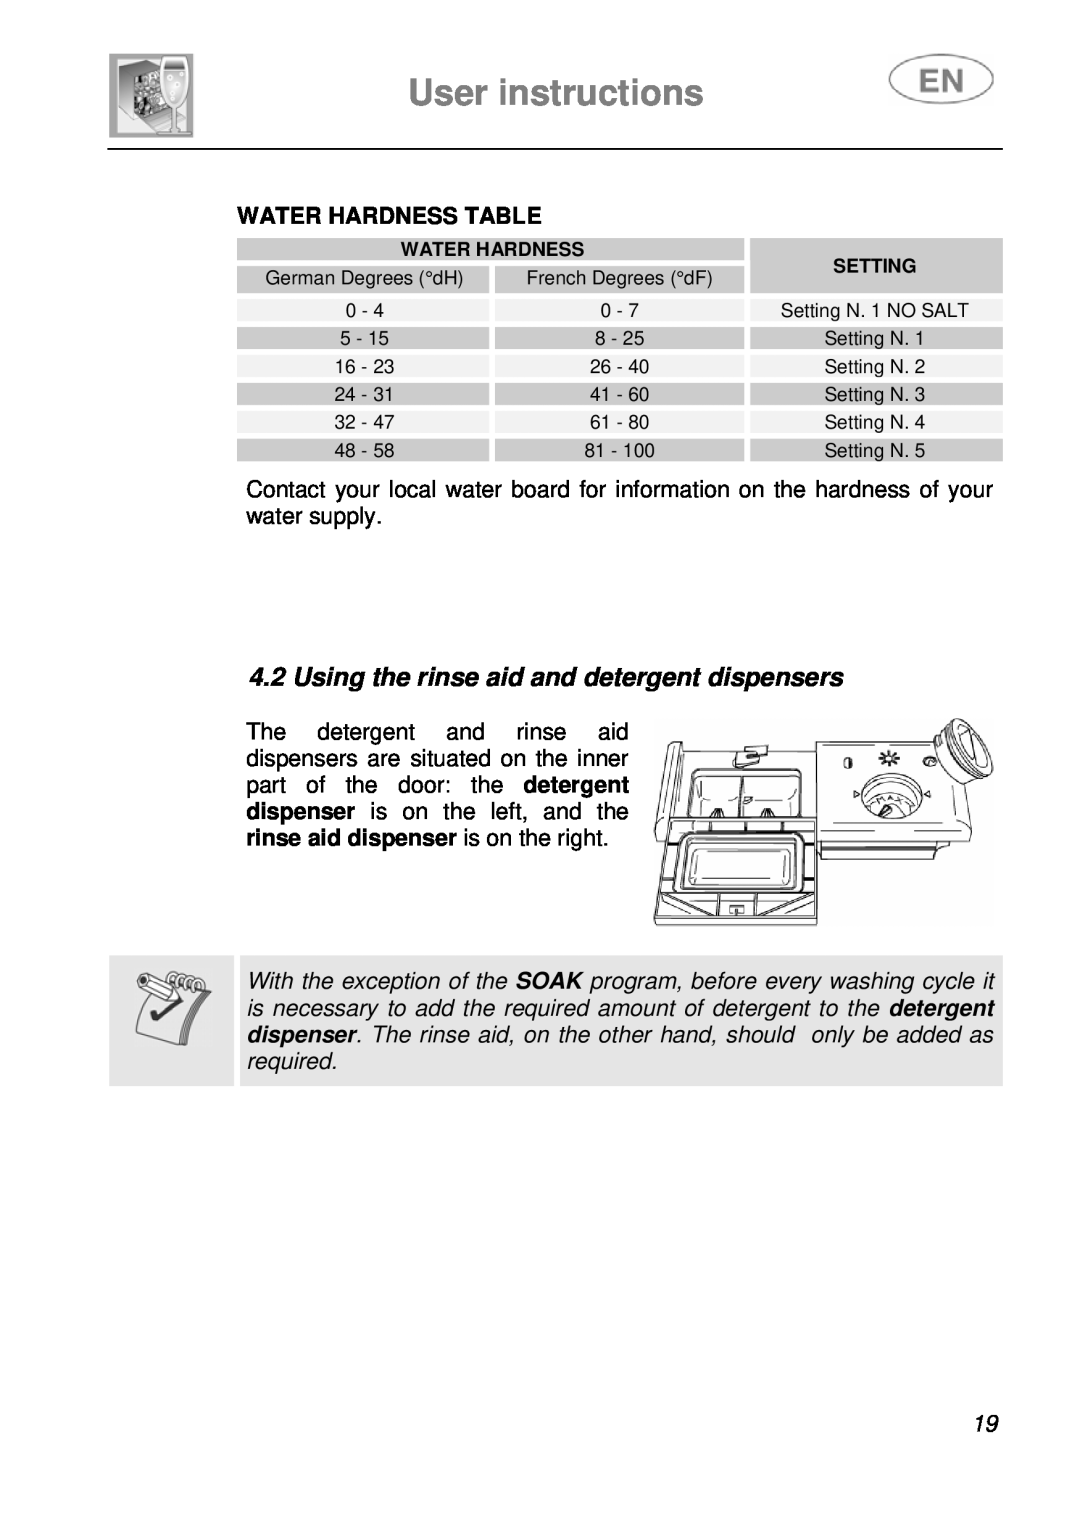 Smeg STA643PQ manual User instructions, Using the rinse aid and detergent dispensers, Water Hardness Table 